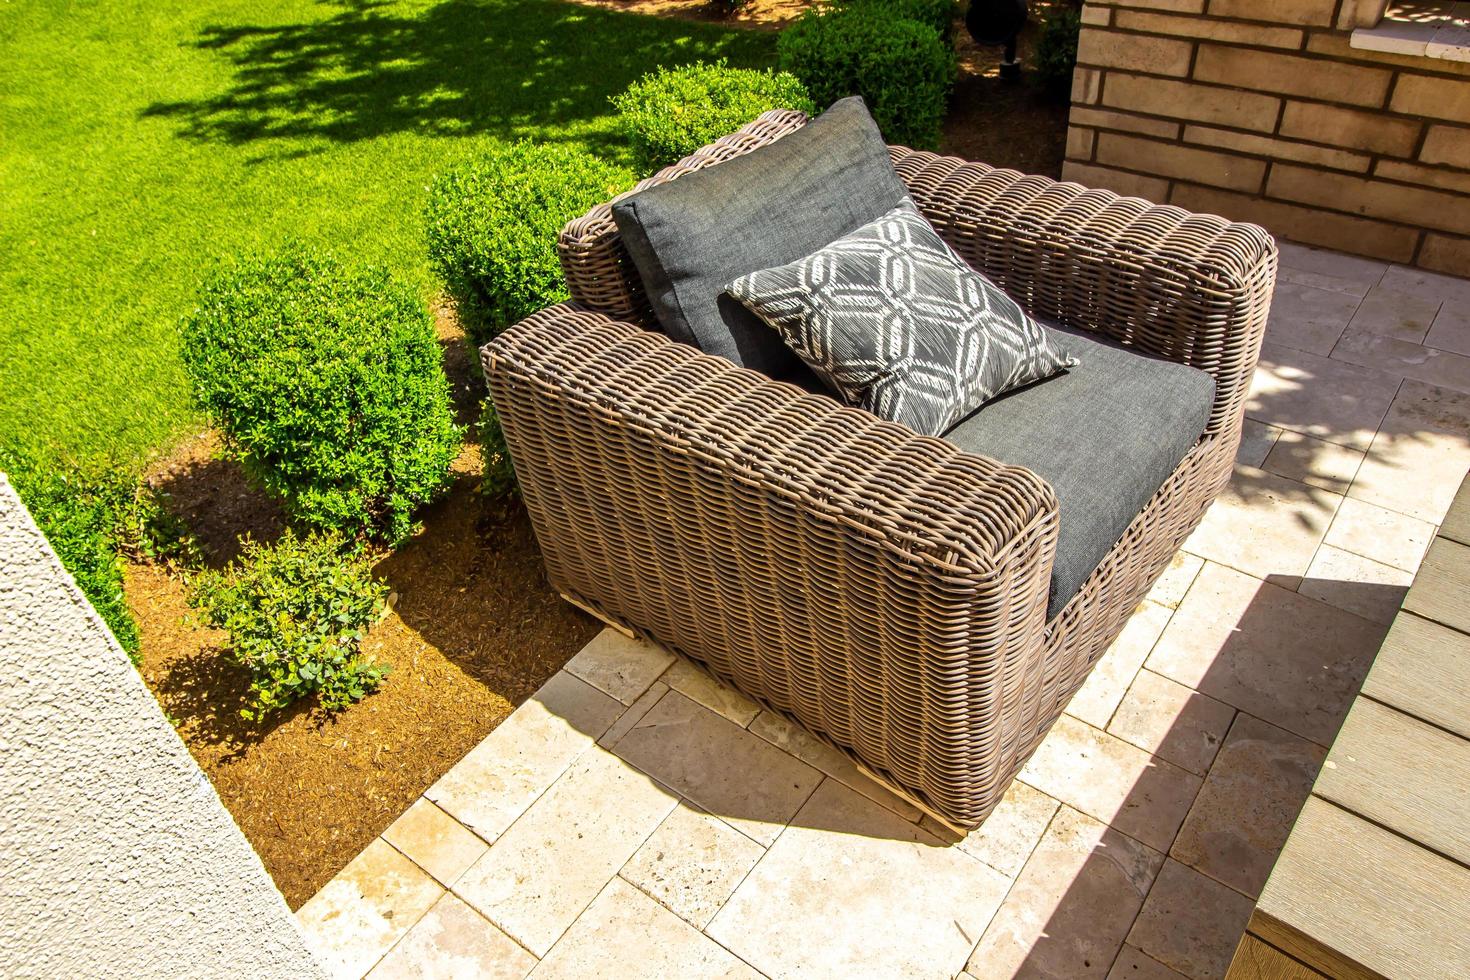 Large Wicker Arm Chair On Back Yard Patio photo